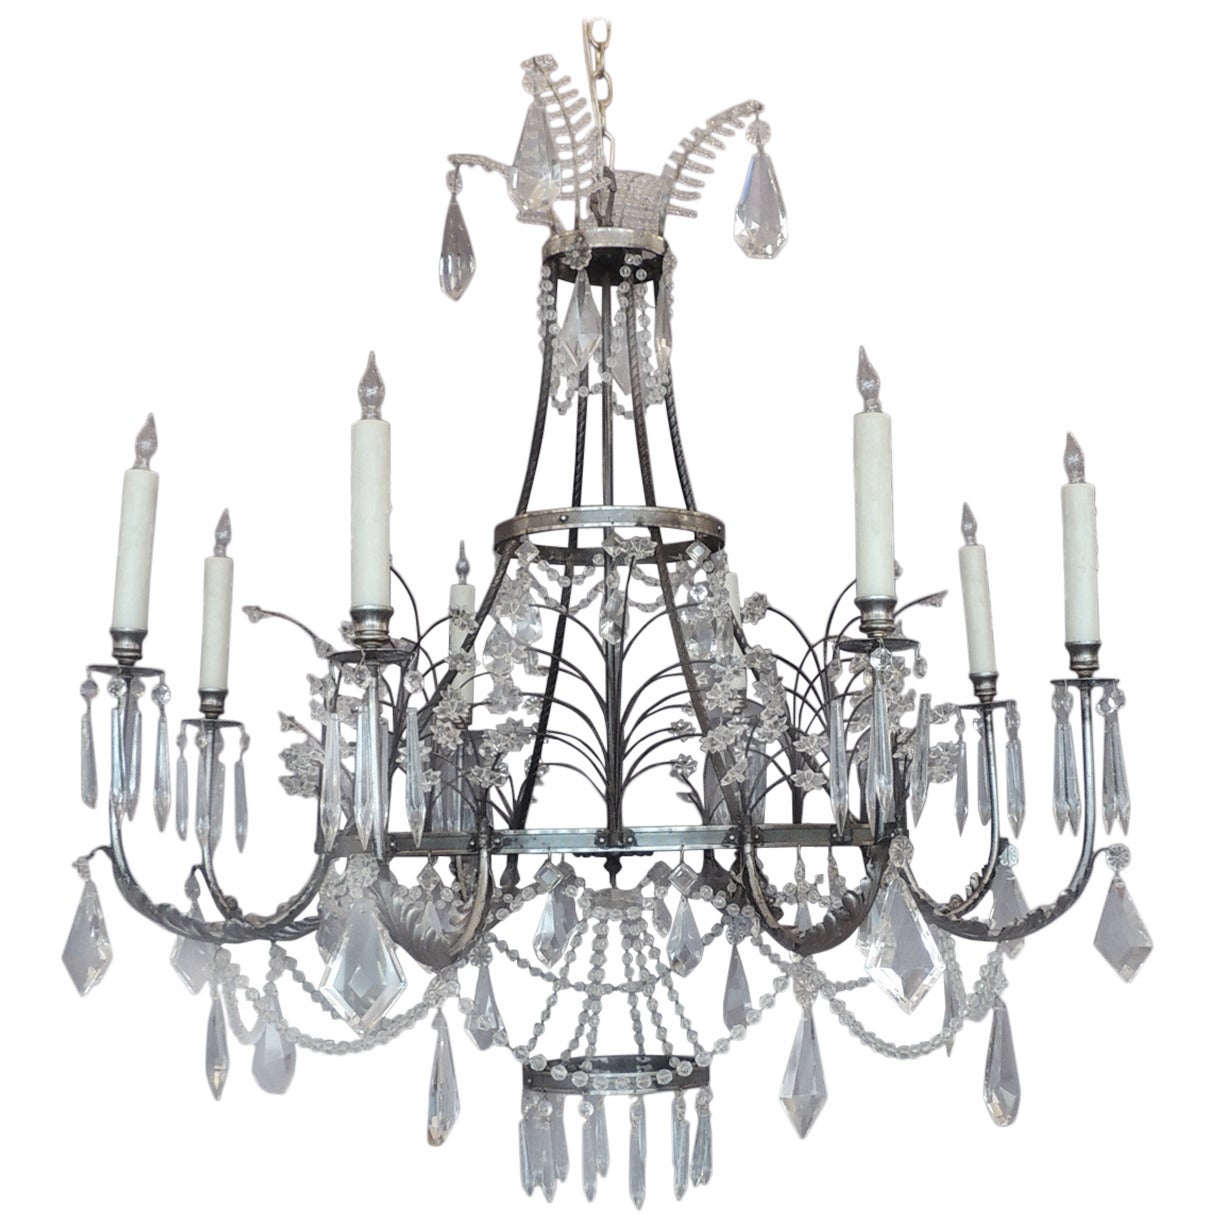 Early 20th C Russian Empire Style Chandelier